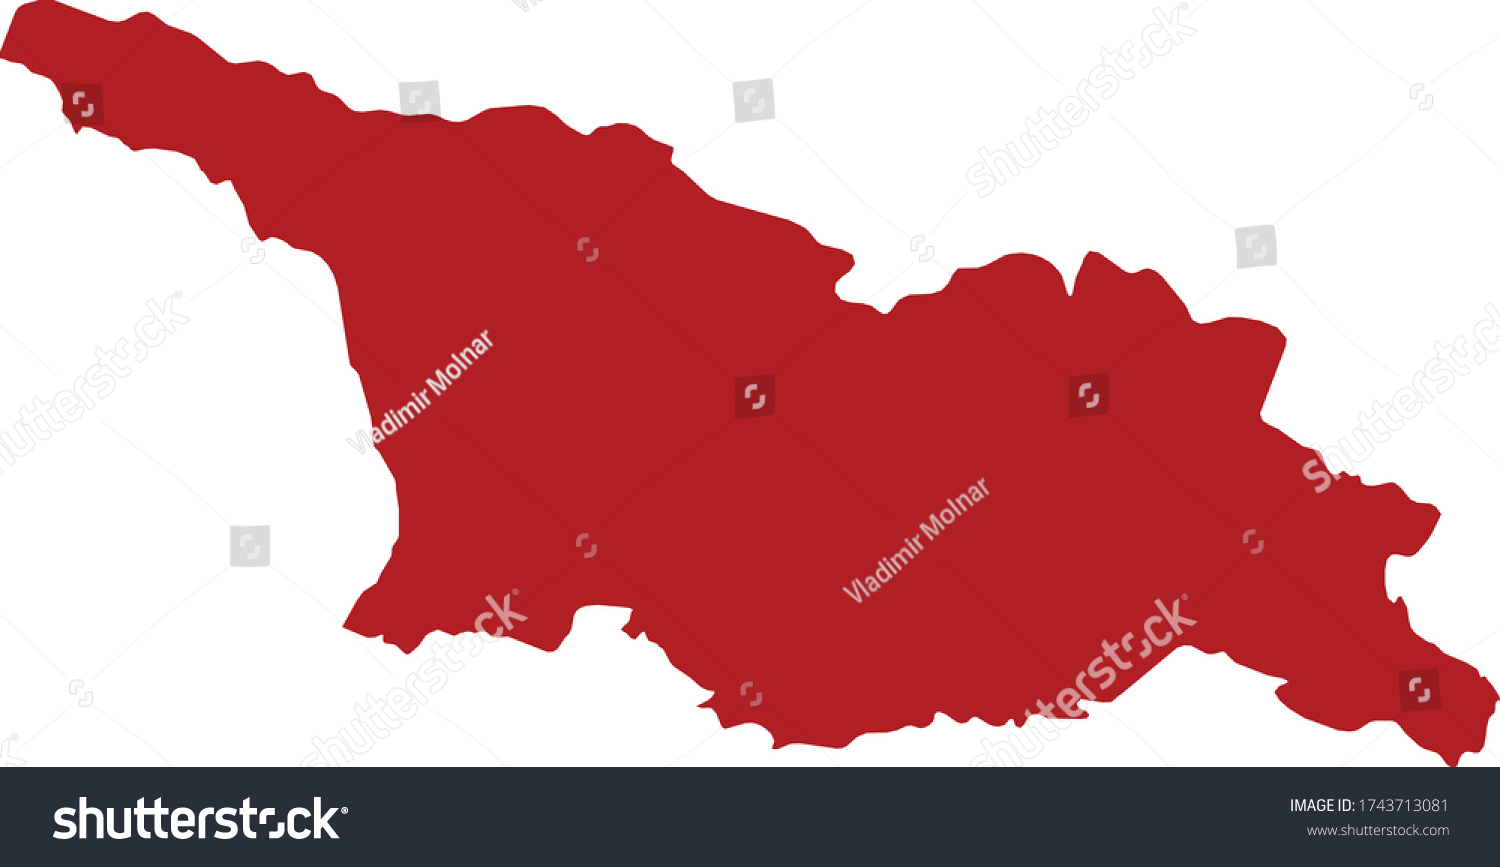 Vector Illustration Of Georgia Map Royalty Free Stock Vector 1743713081 4355